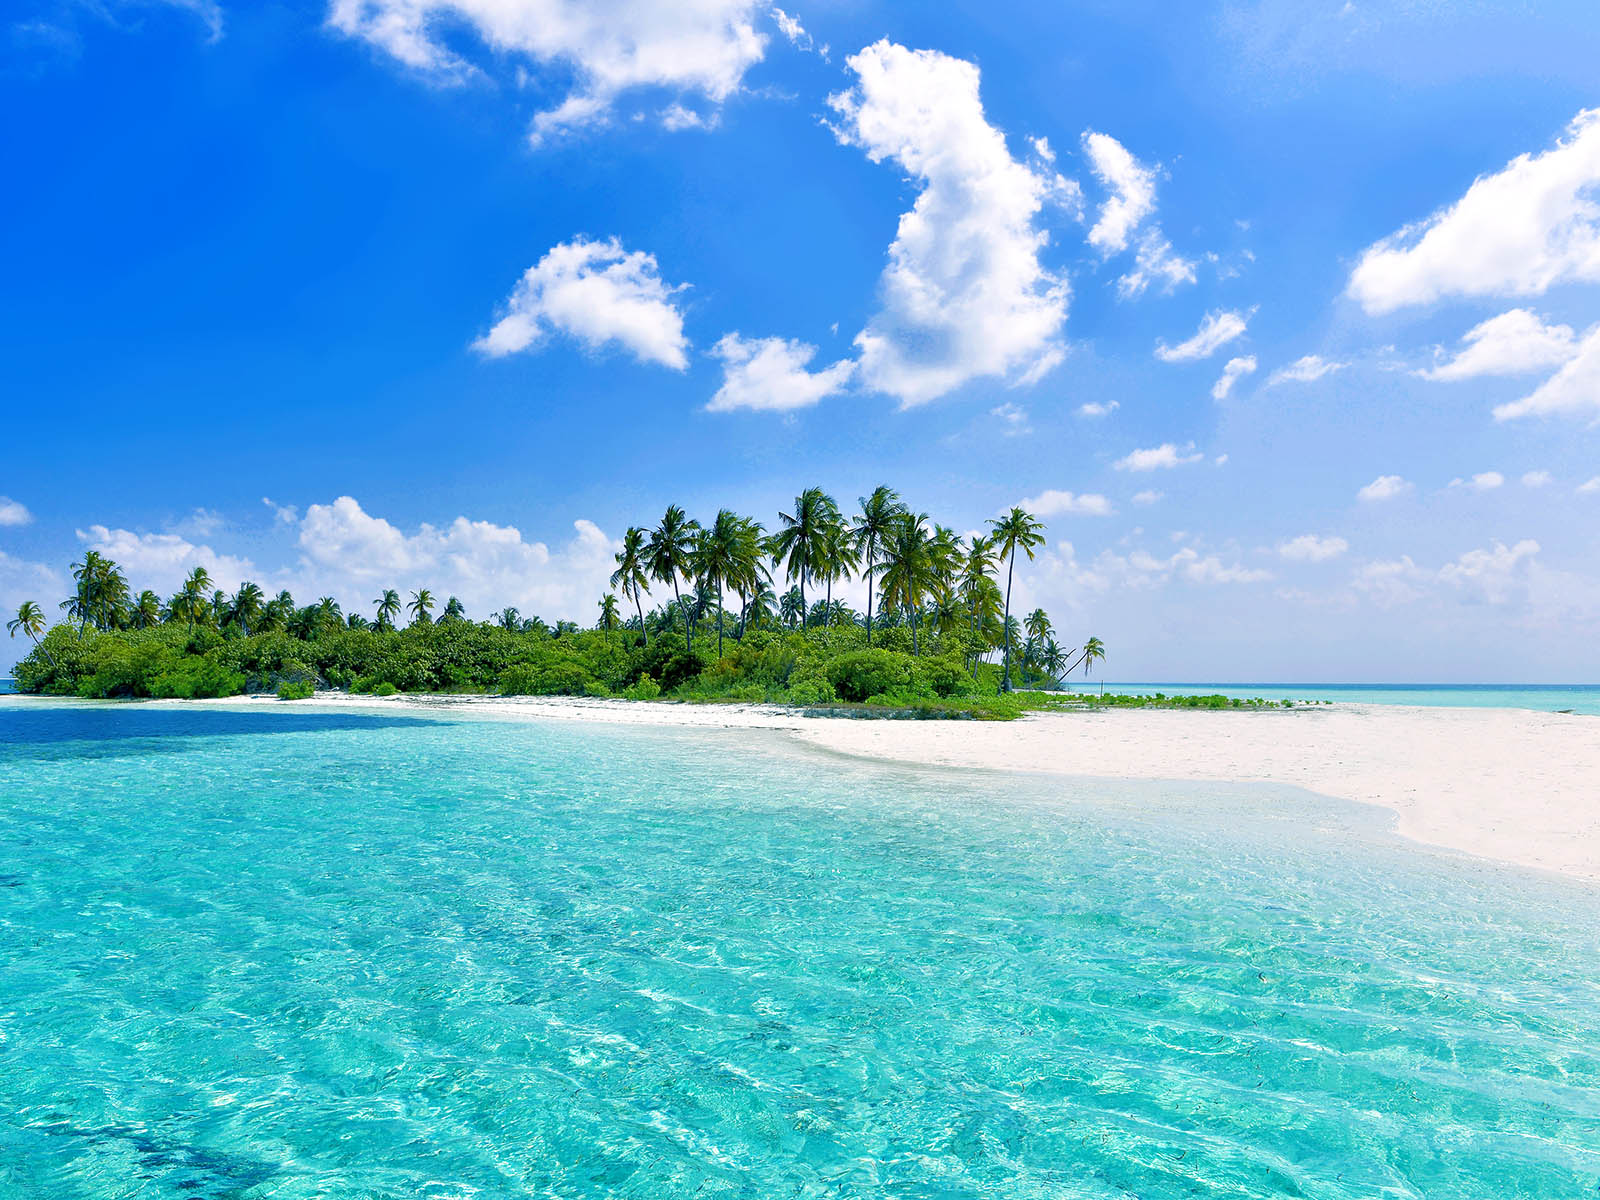 It’s That Easy — Score Big on This 30-Question ‘Round the World Quiz to Win Maldives Island